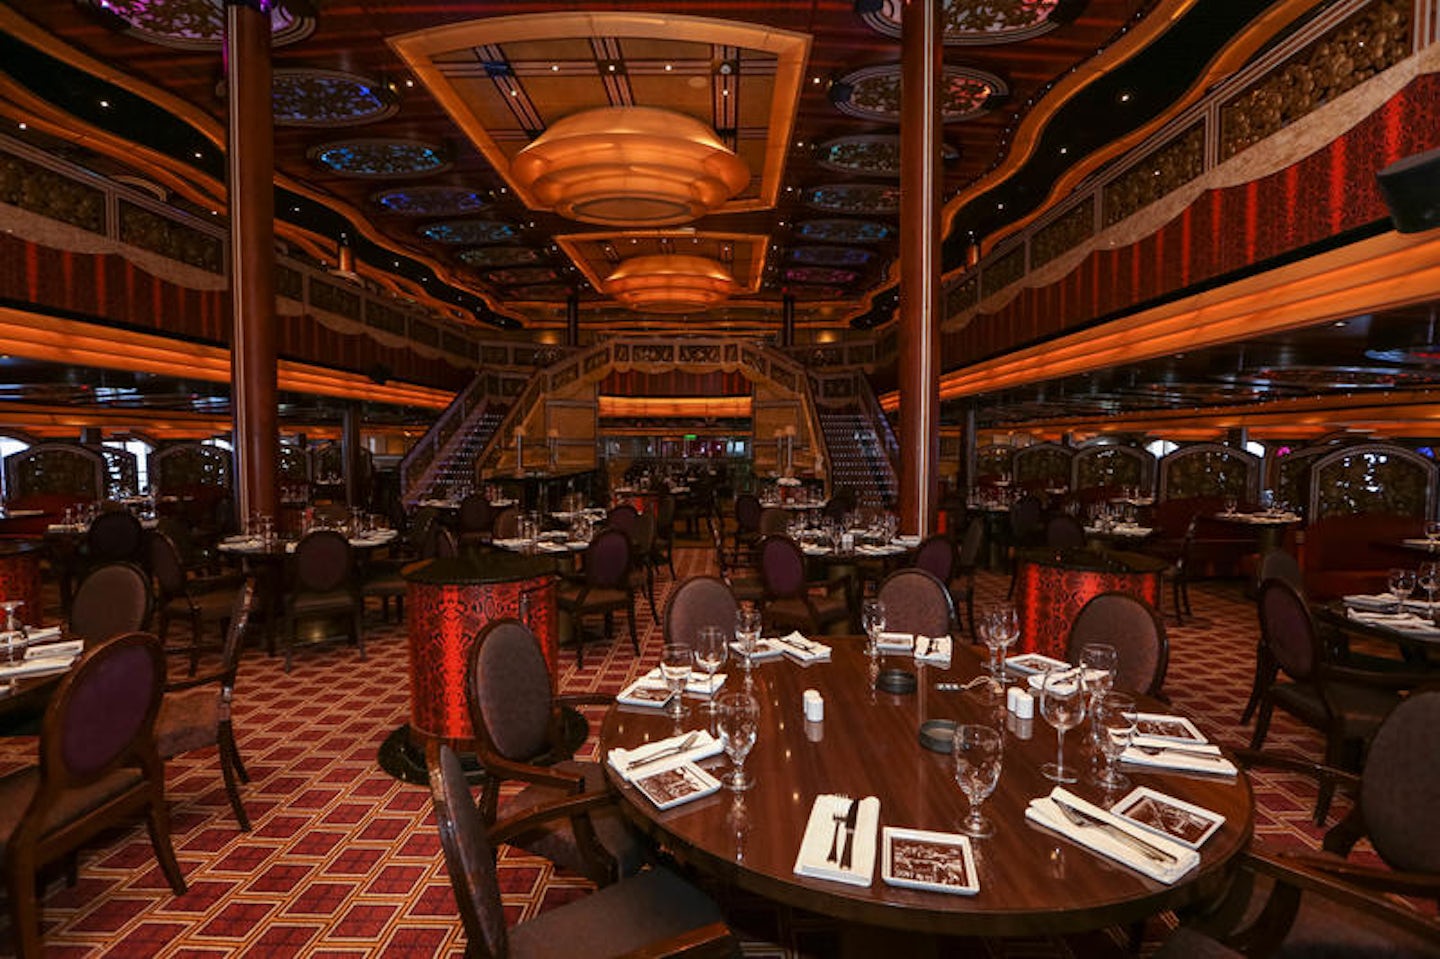 Carnival Freedom Dining Room Dress Code